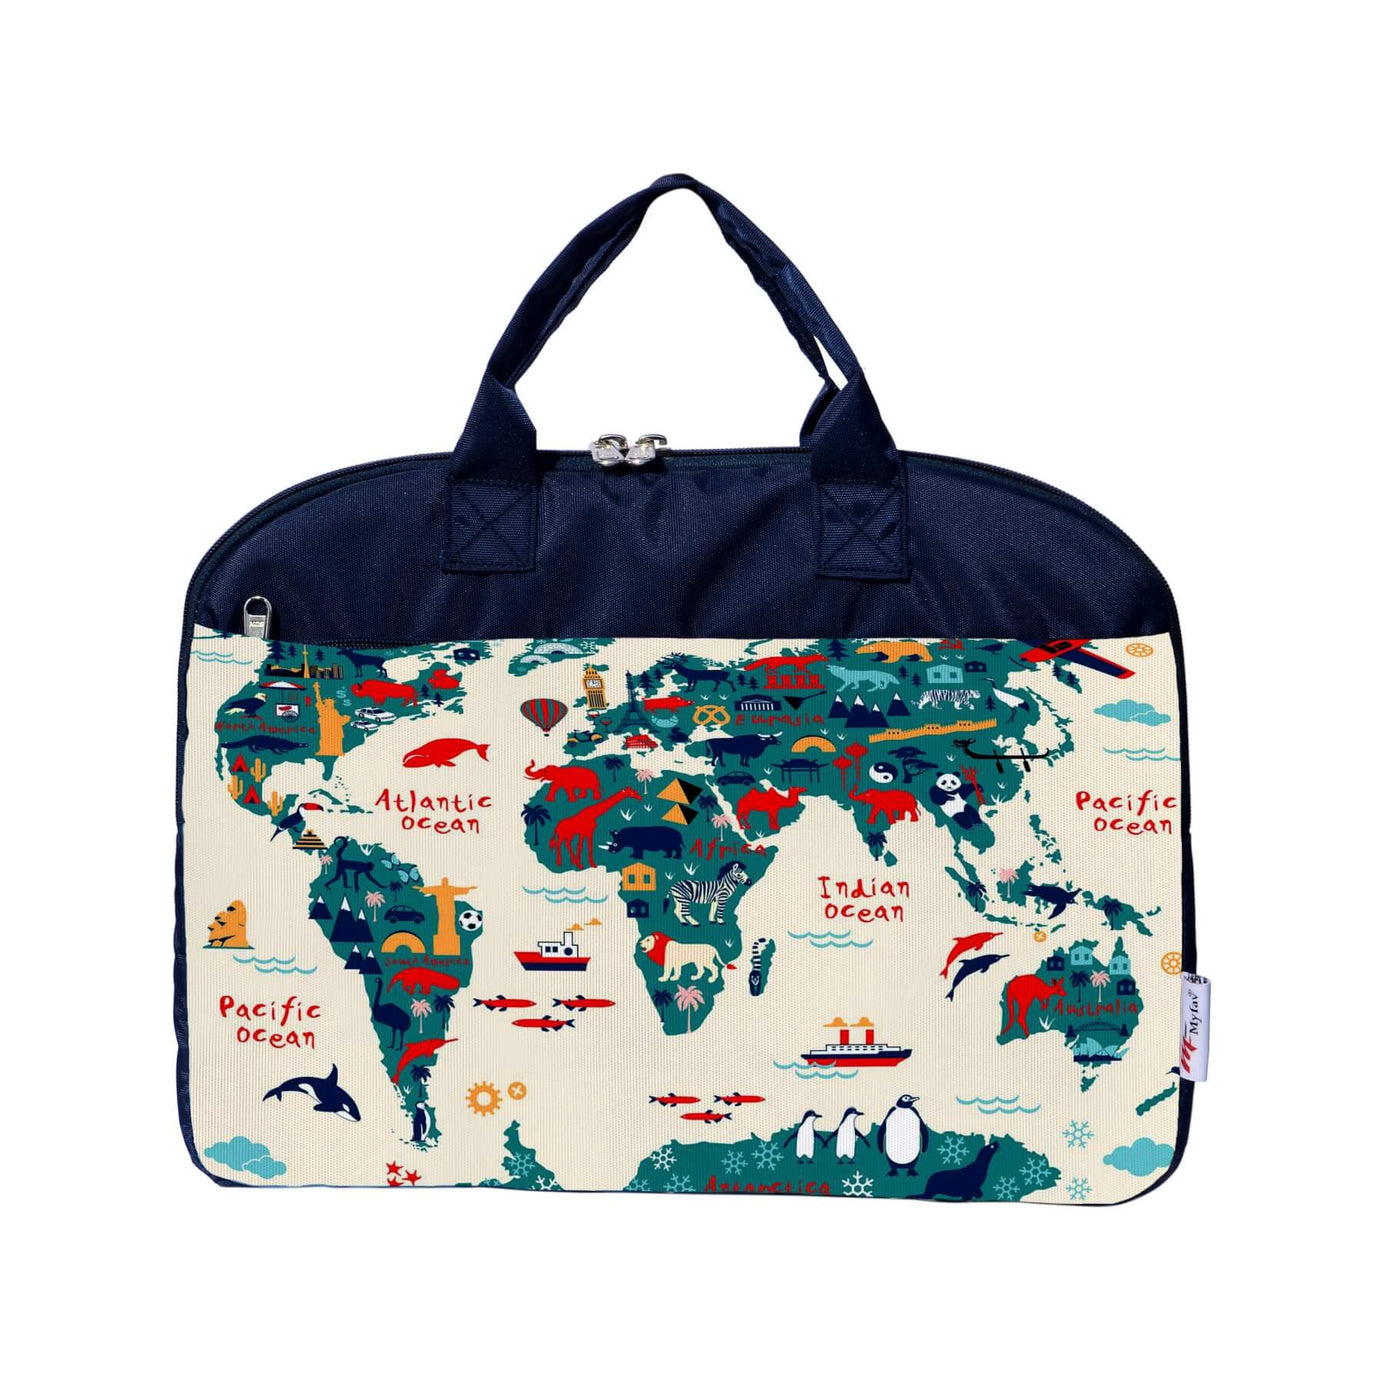 My Fav Ocean Map Office Laptop Bag Briefcase 15.6 Inch for Women and Men